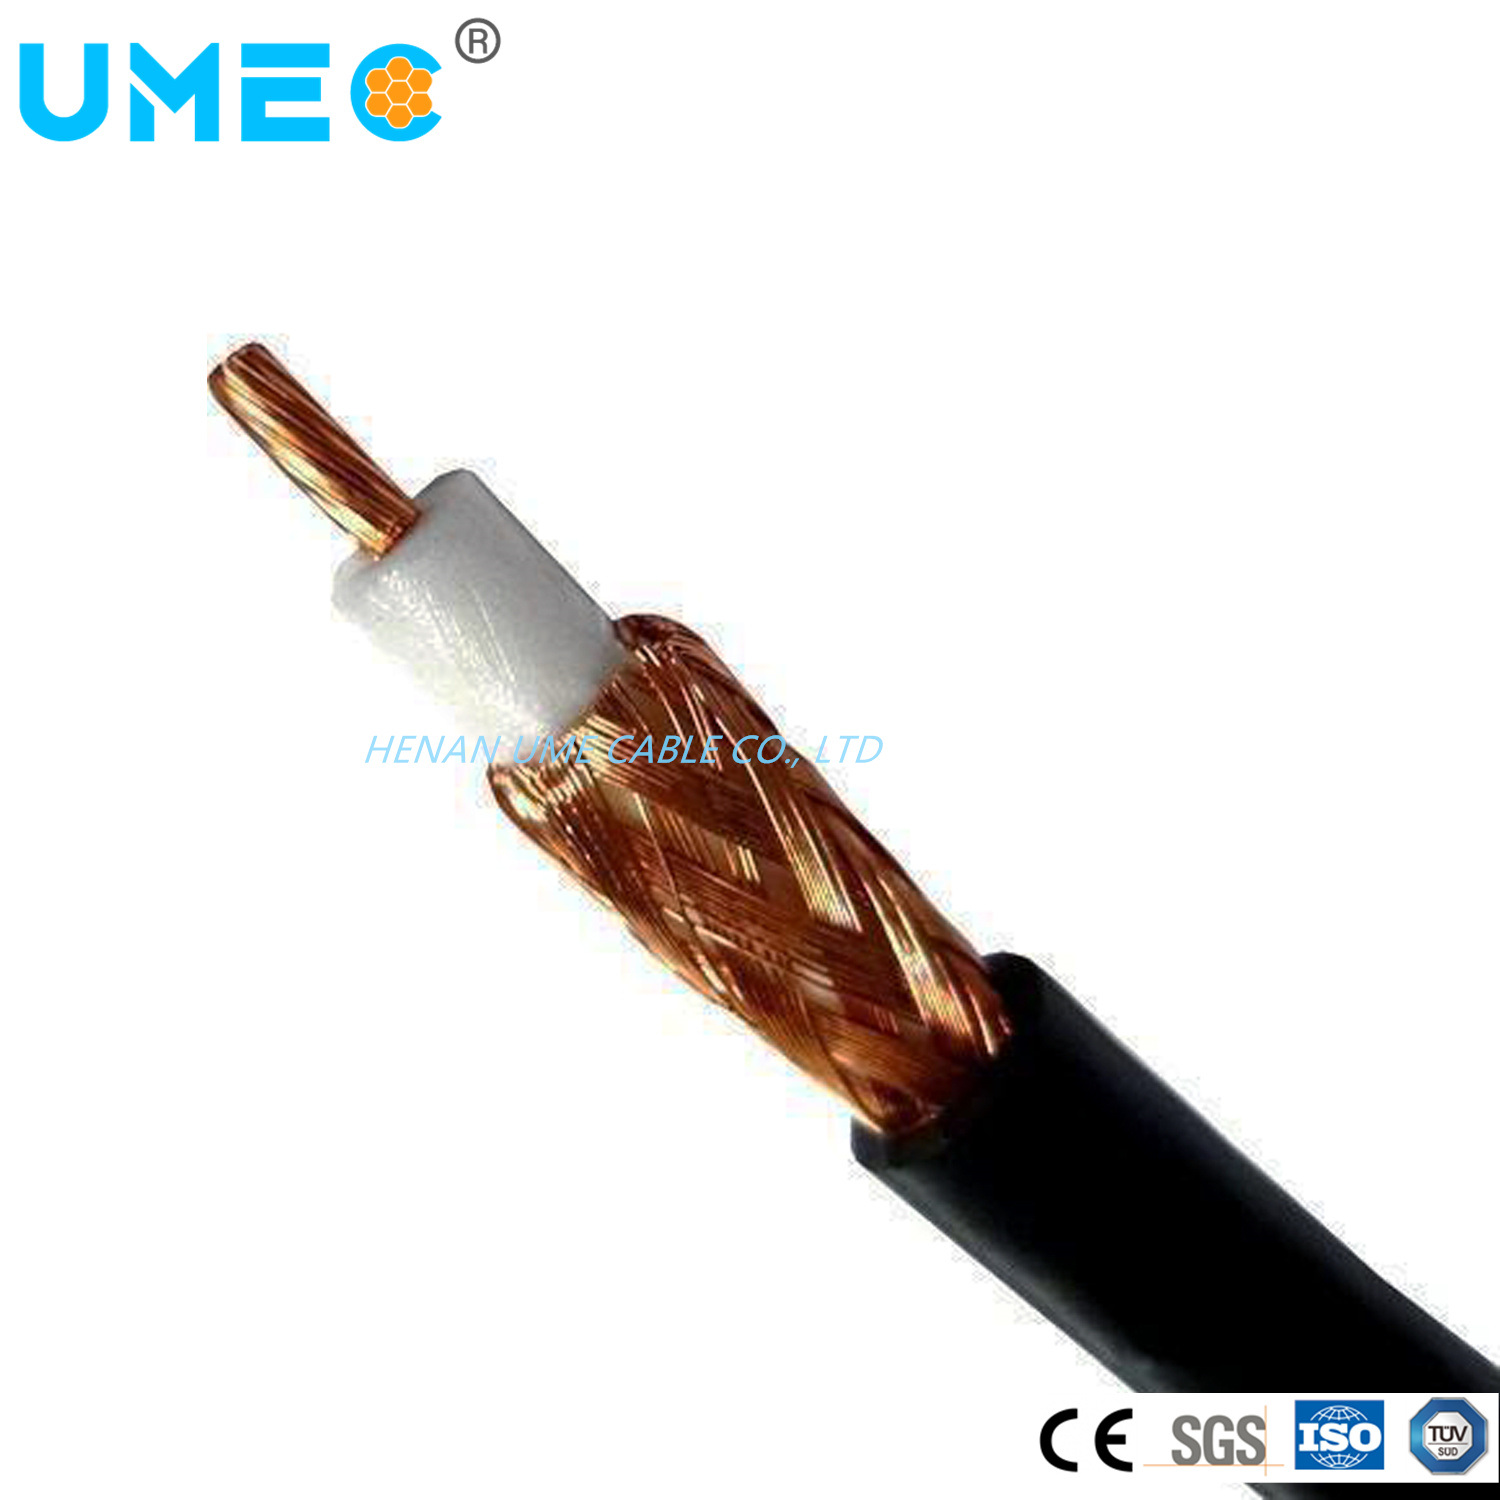 OEM Low Loss Helium Miner Cable Coaxial Cable LMR 400 N Type to SMA Type Bobcat Rak Cable LMR400 3/5/ 8/15/20 Customized Coaxial Cable